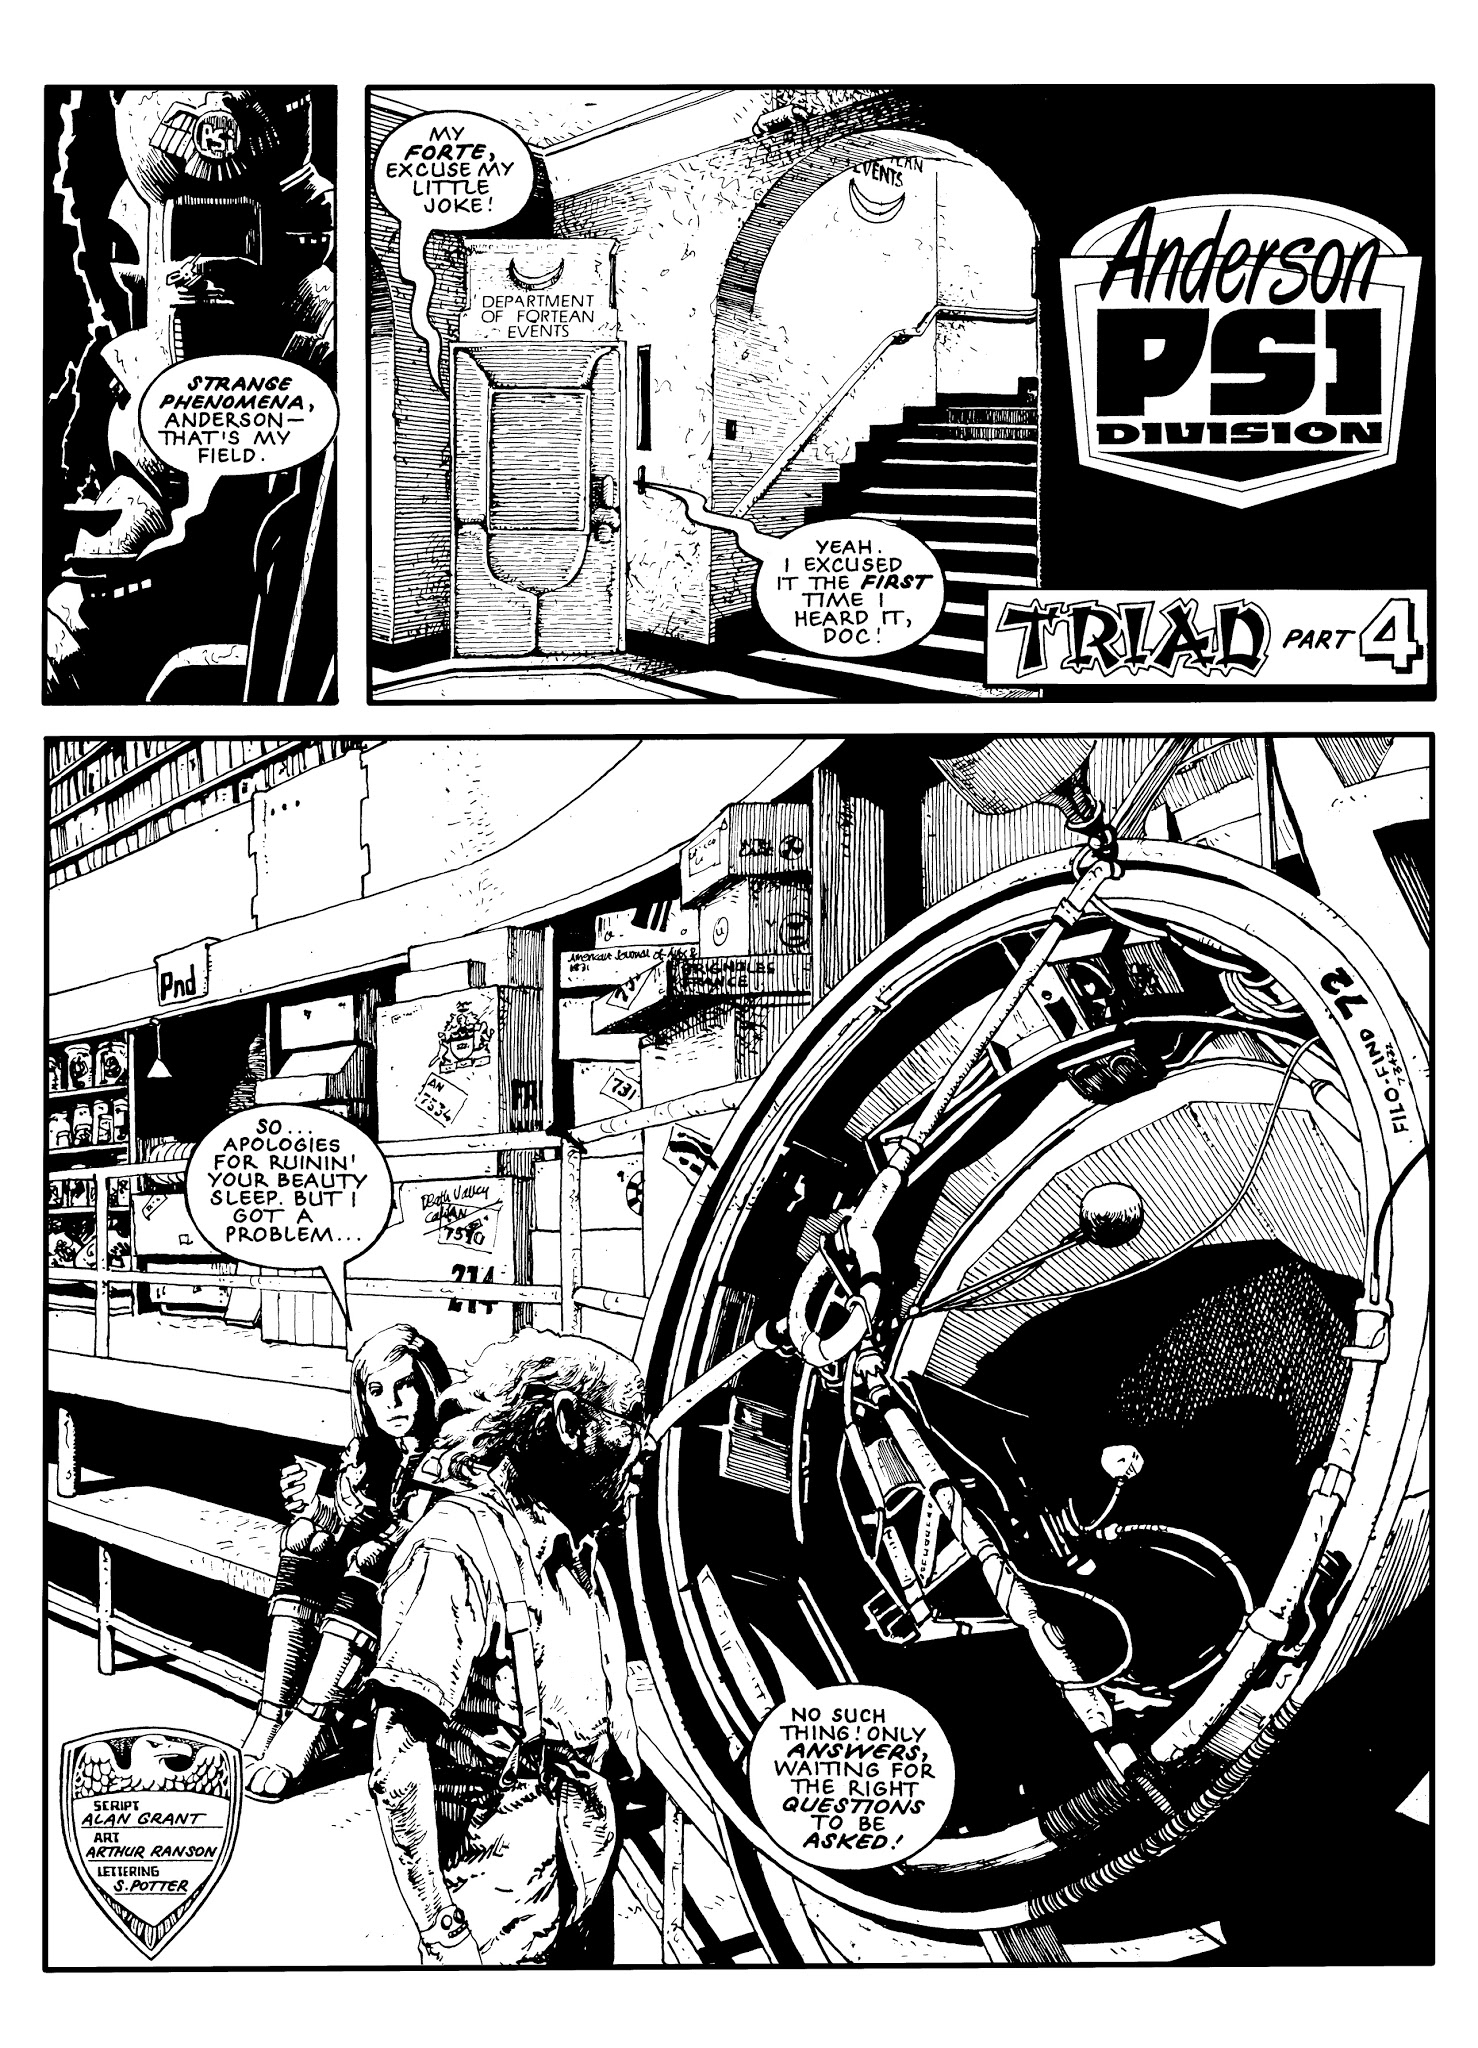 Read online Judge Anderson: The Psi Files comic -  Issue # TPB 1 - 281